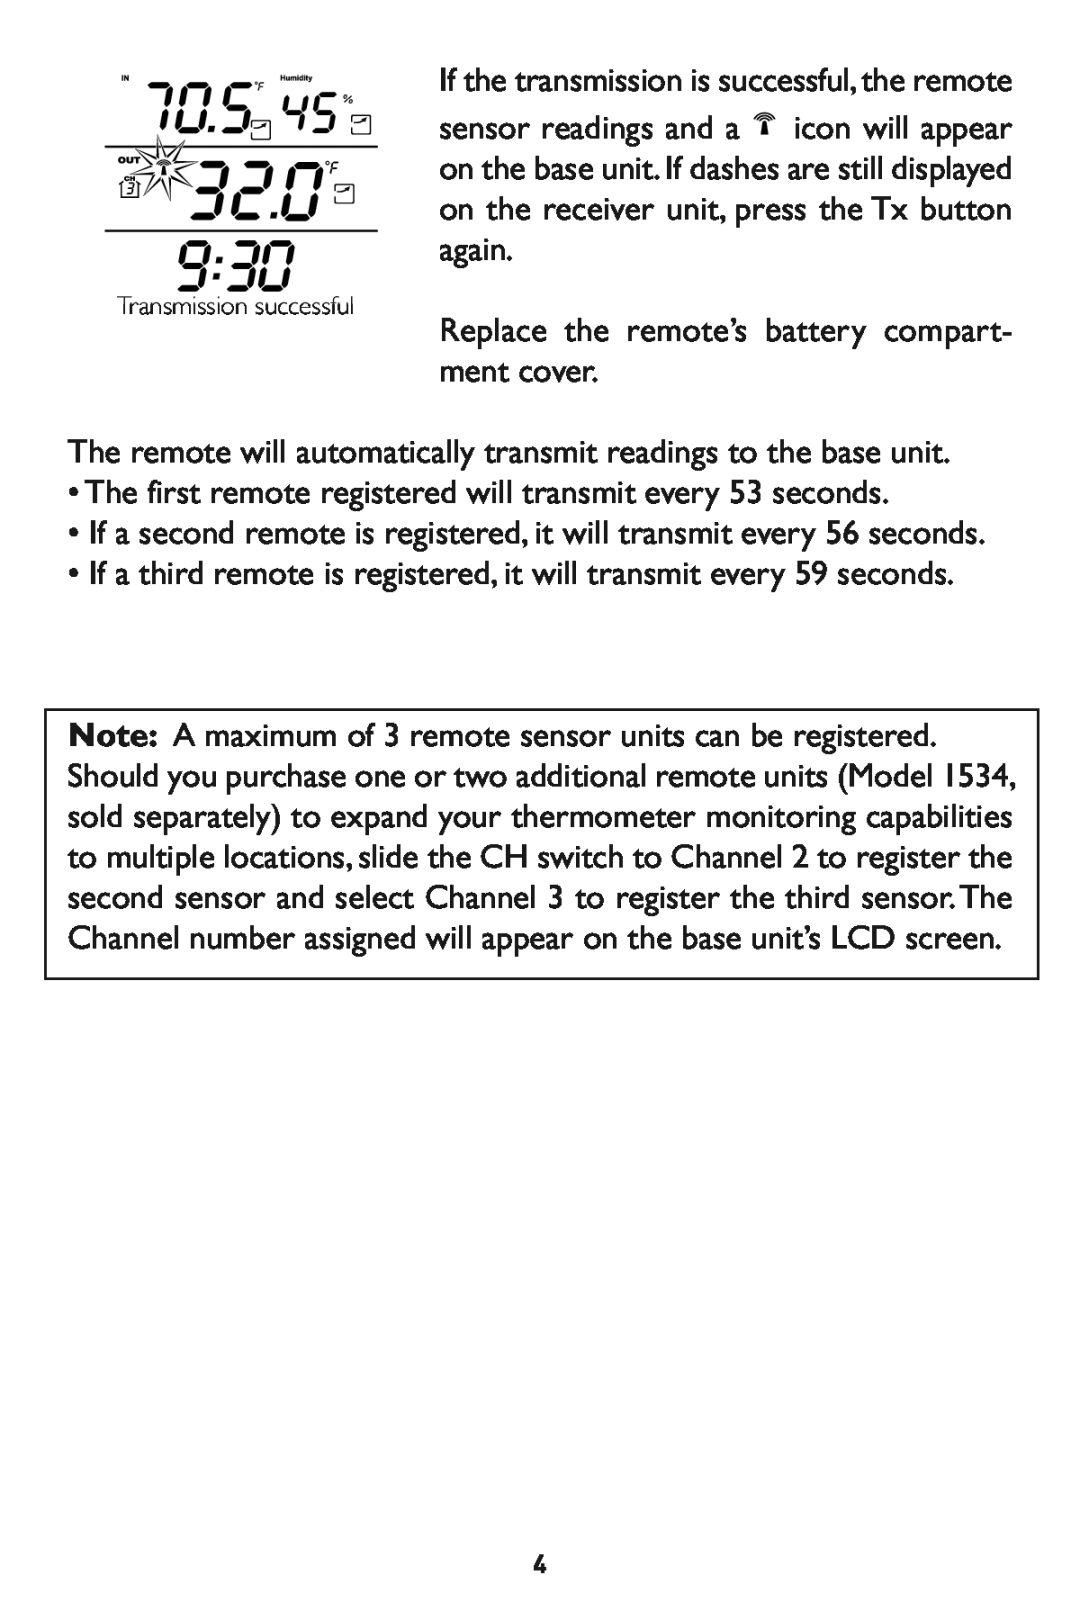 Taylor 1525 Replace the remote’s battery compart- ment cover, The first remote registered will transmit every 53 seconds 